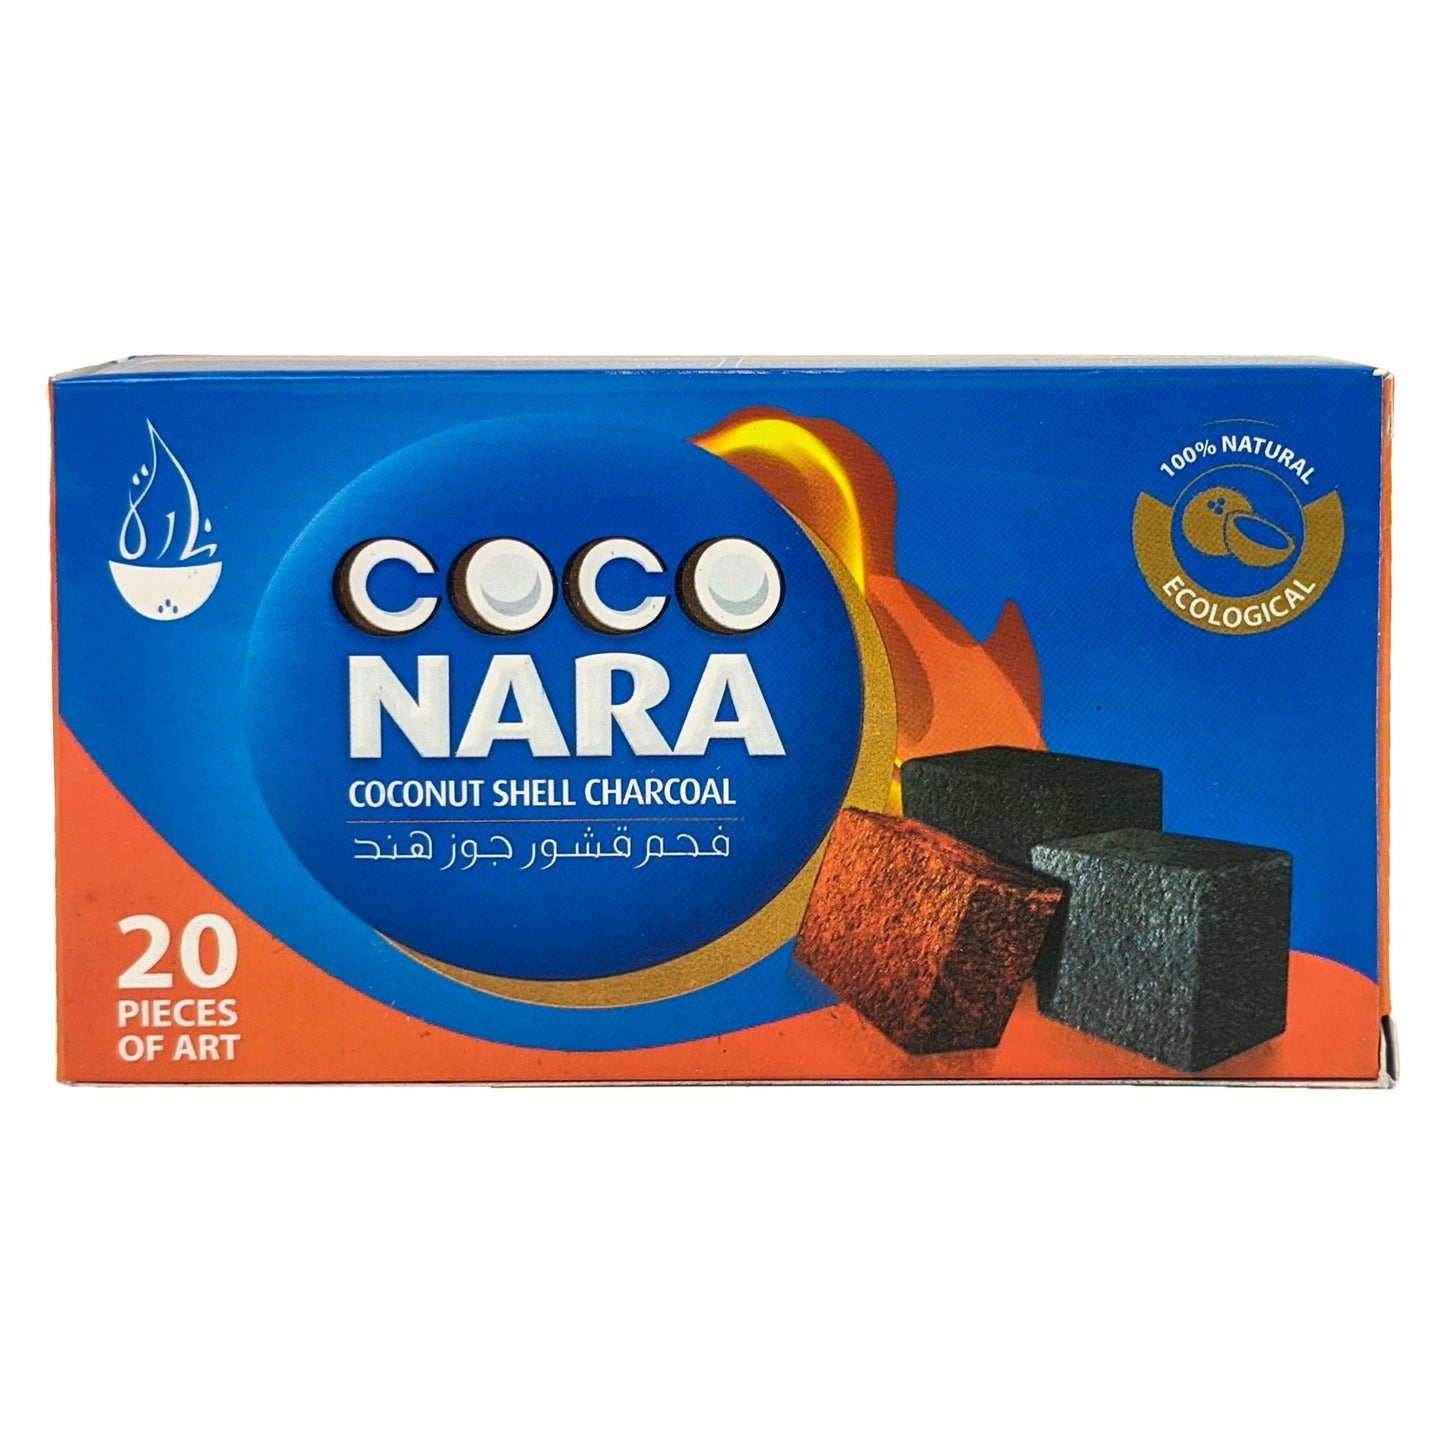 Coco Nara Coconut Shell Charcoal, 20 Pieces